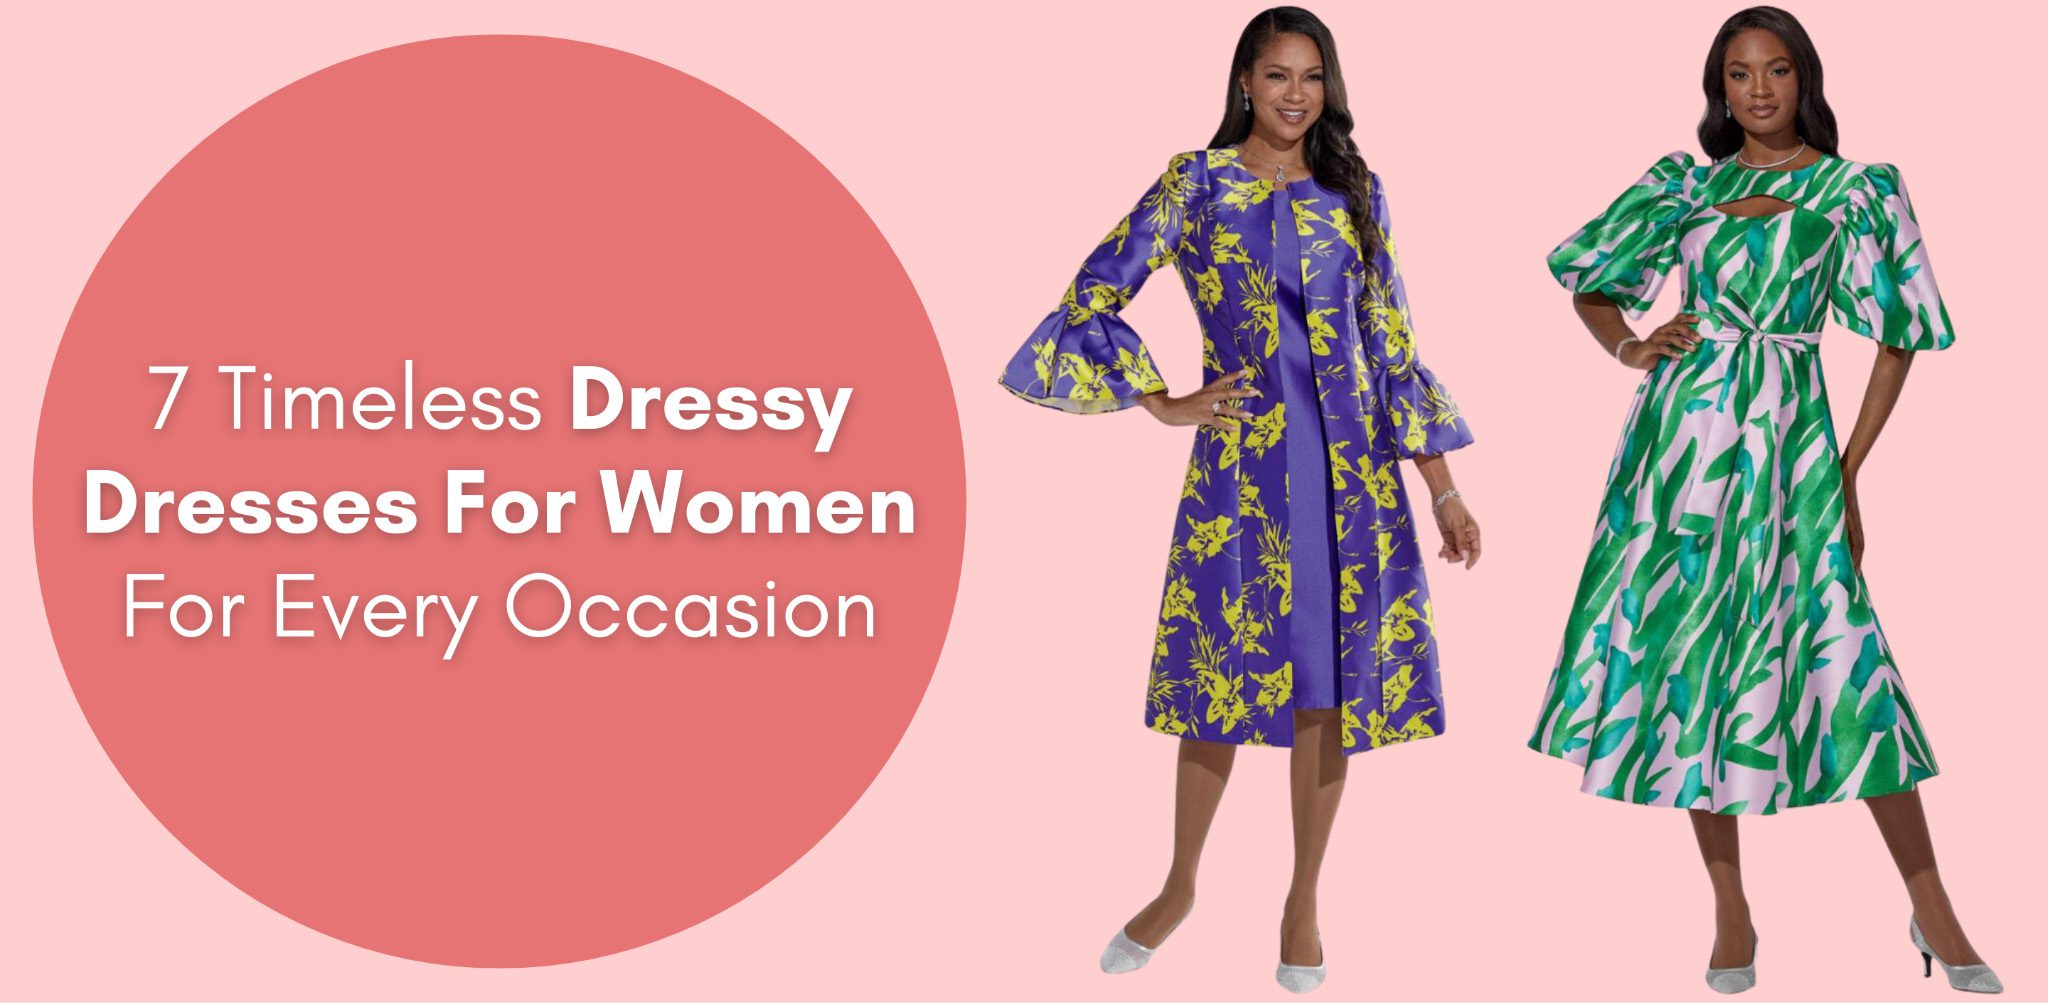 7 Timeless Dressy Dresses For Women For Every Occasion